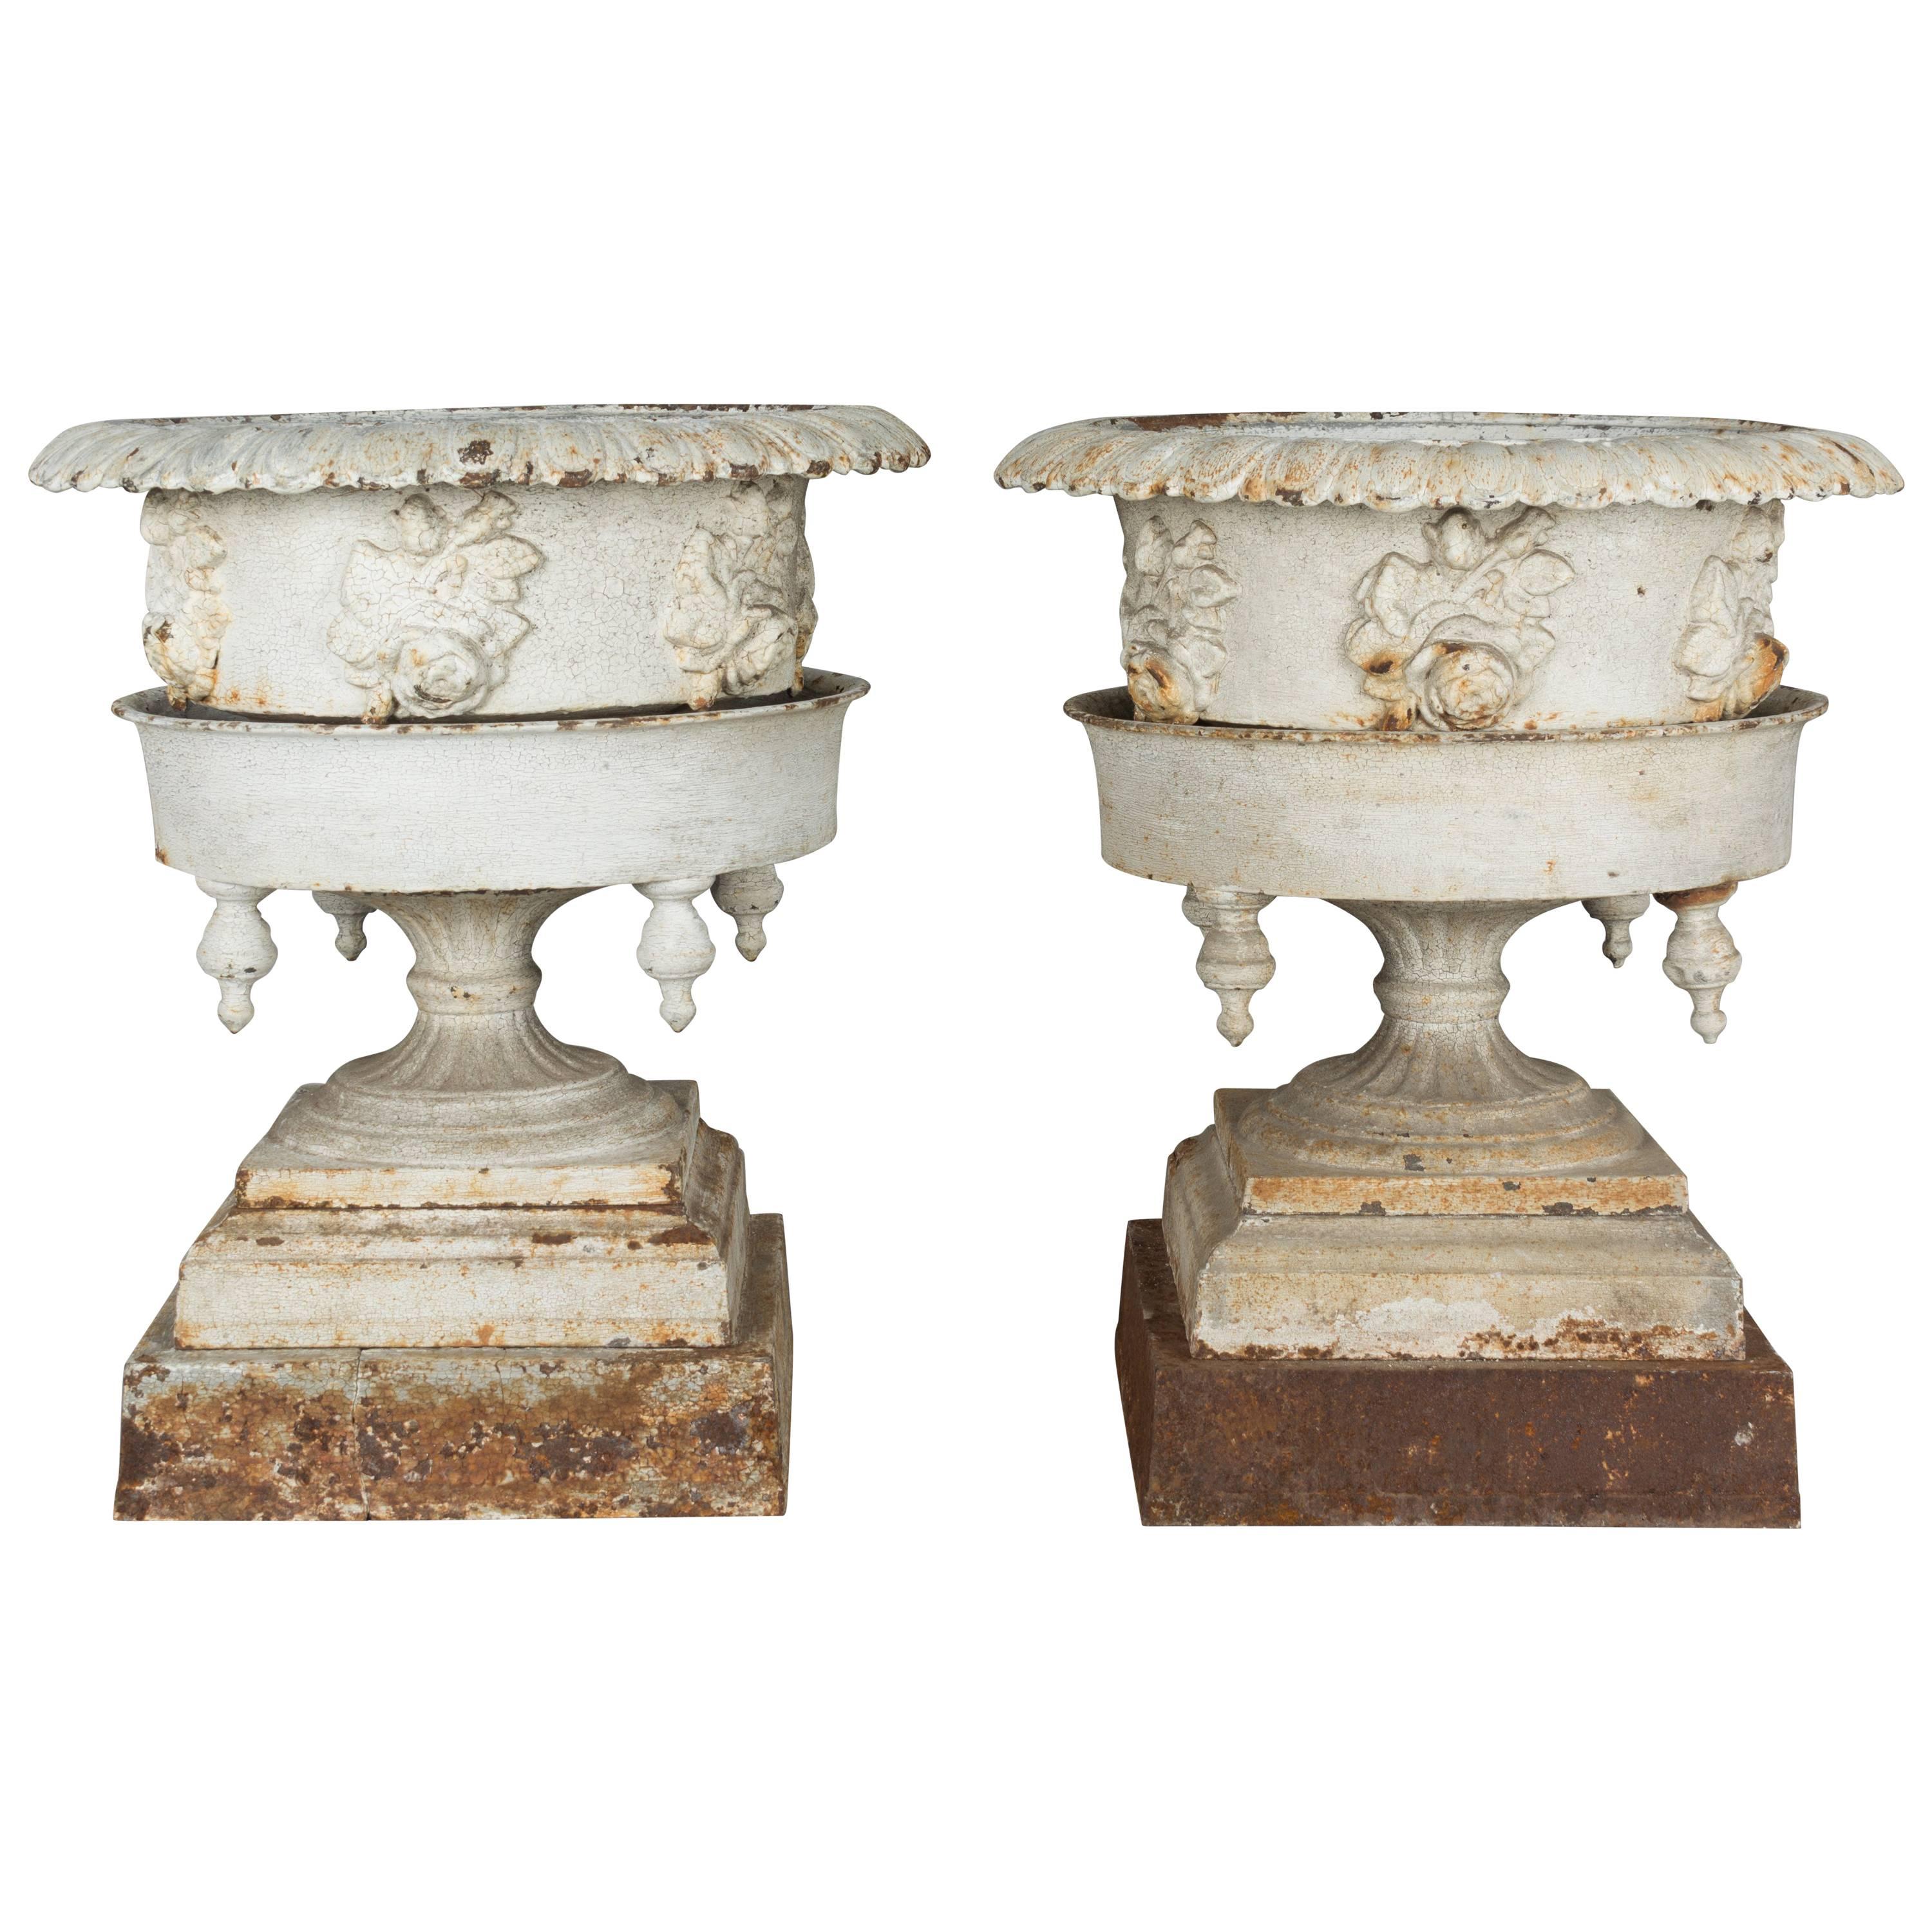 Pair of  American Garden Cast Iron Urns or Planters